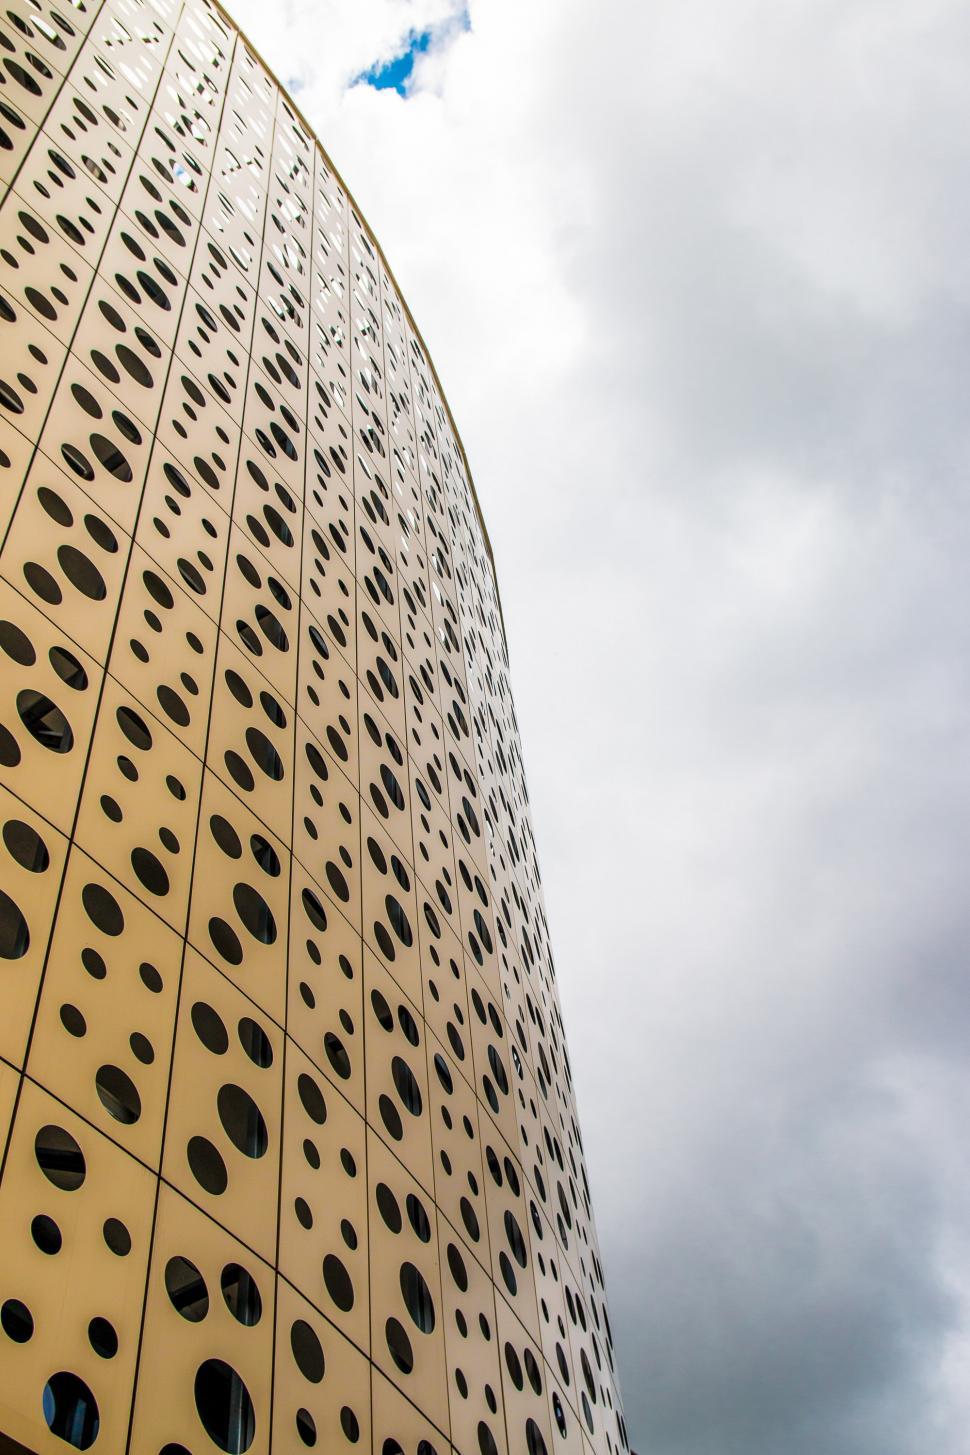 Free Image of Tall Building With Holes 